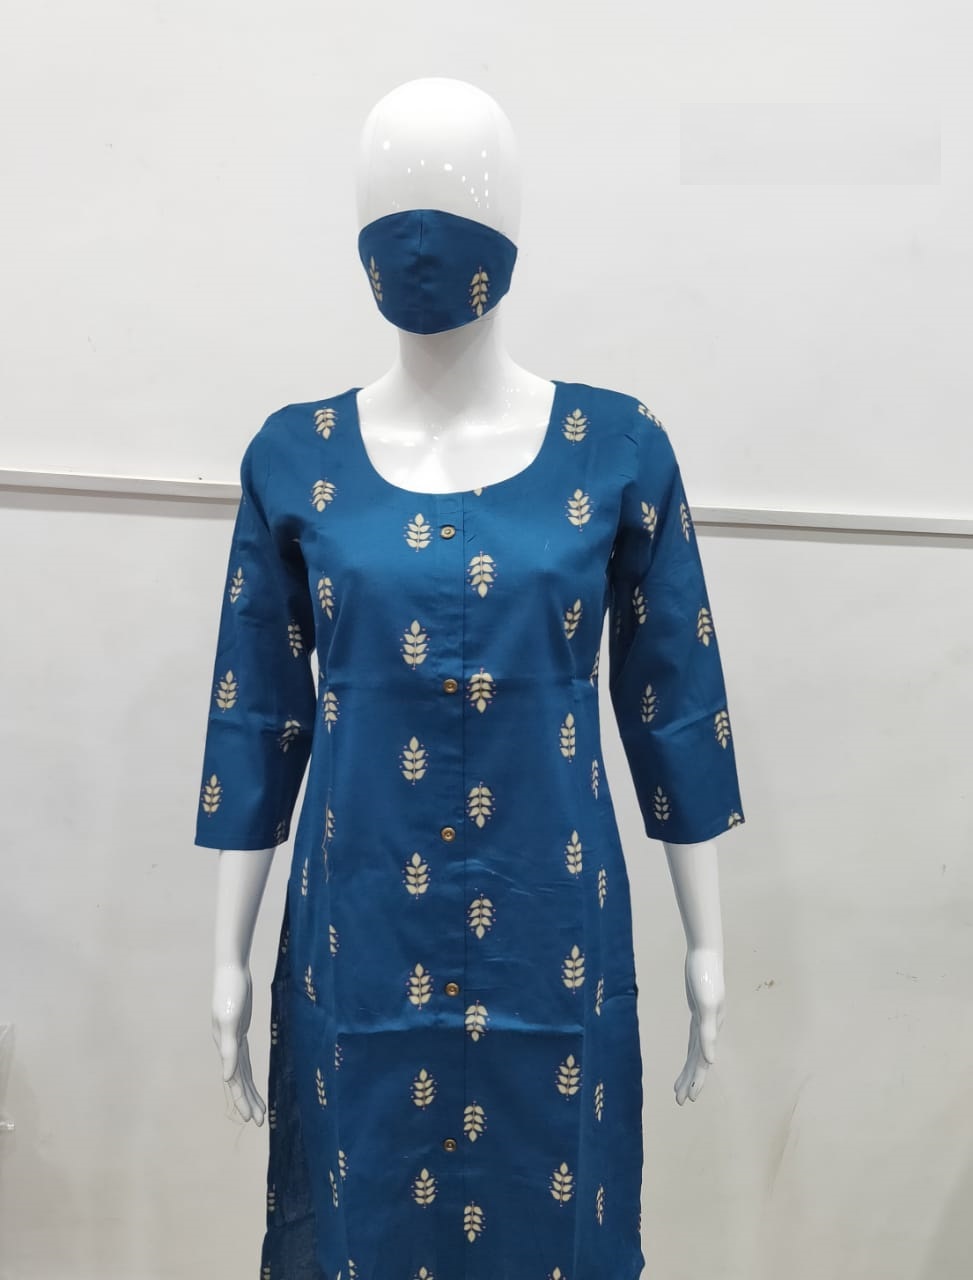 XL Size Stitched Kurtis: Buy XL Size Stitched Kurtis Online at Low Prices  on Snapdeal